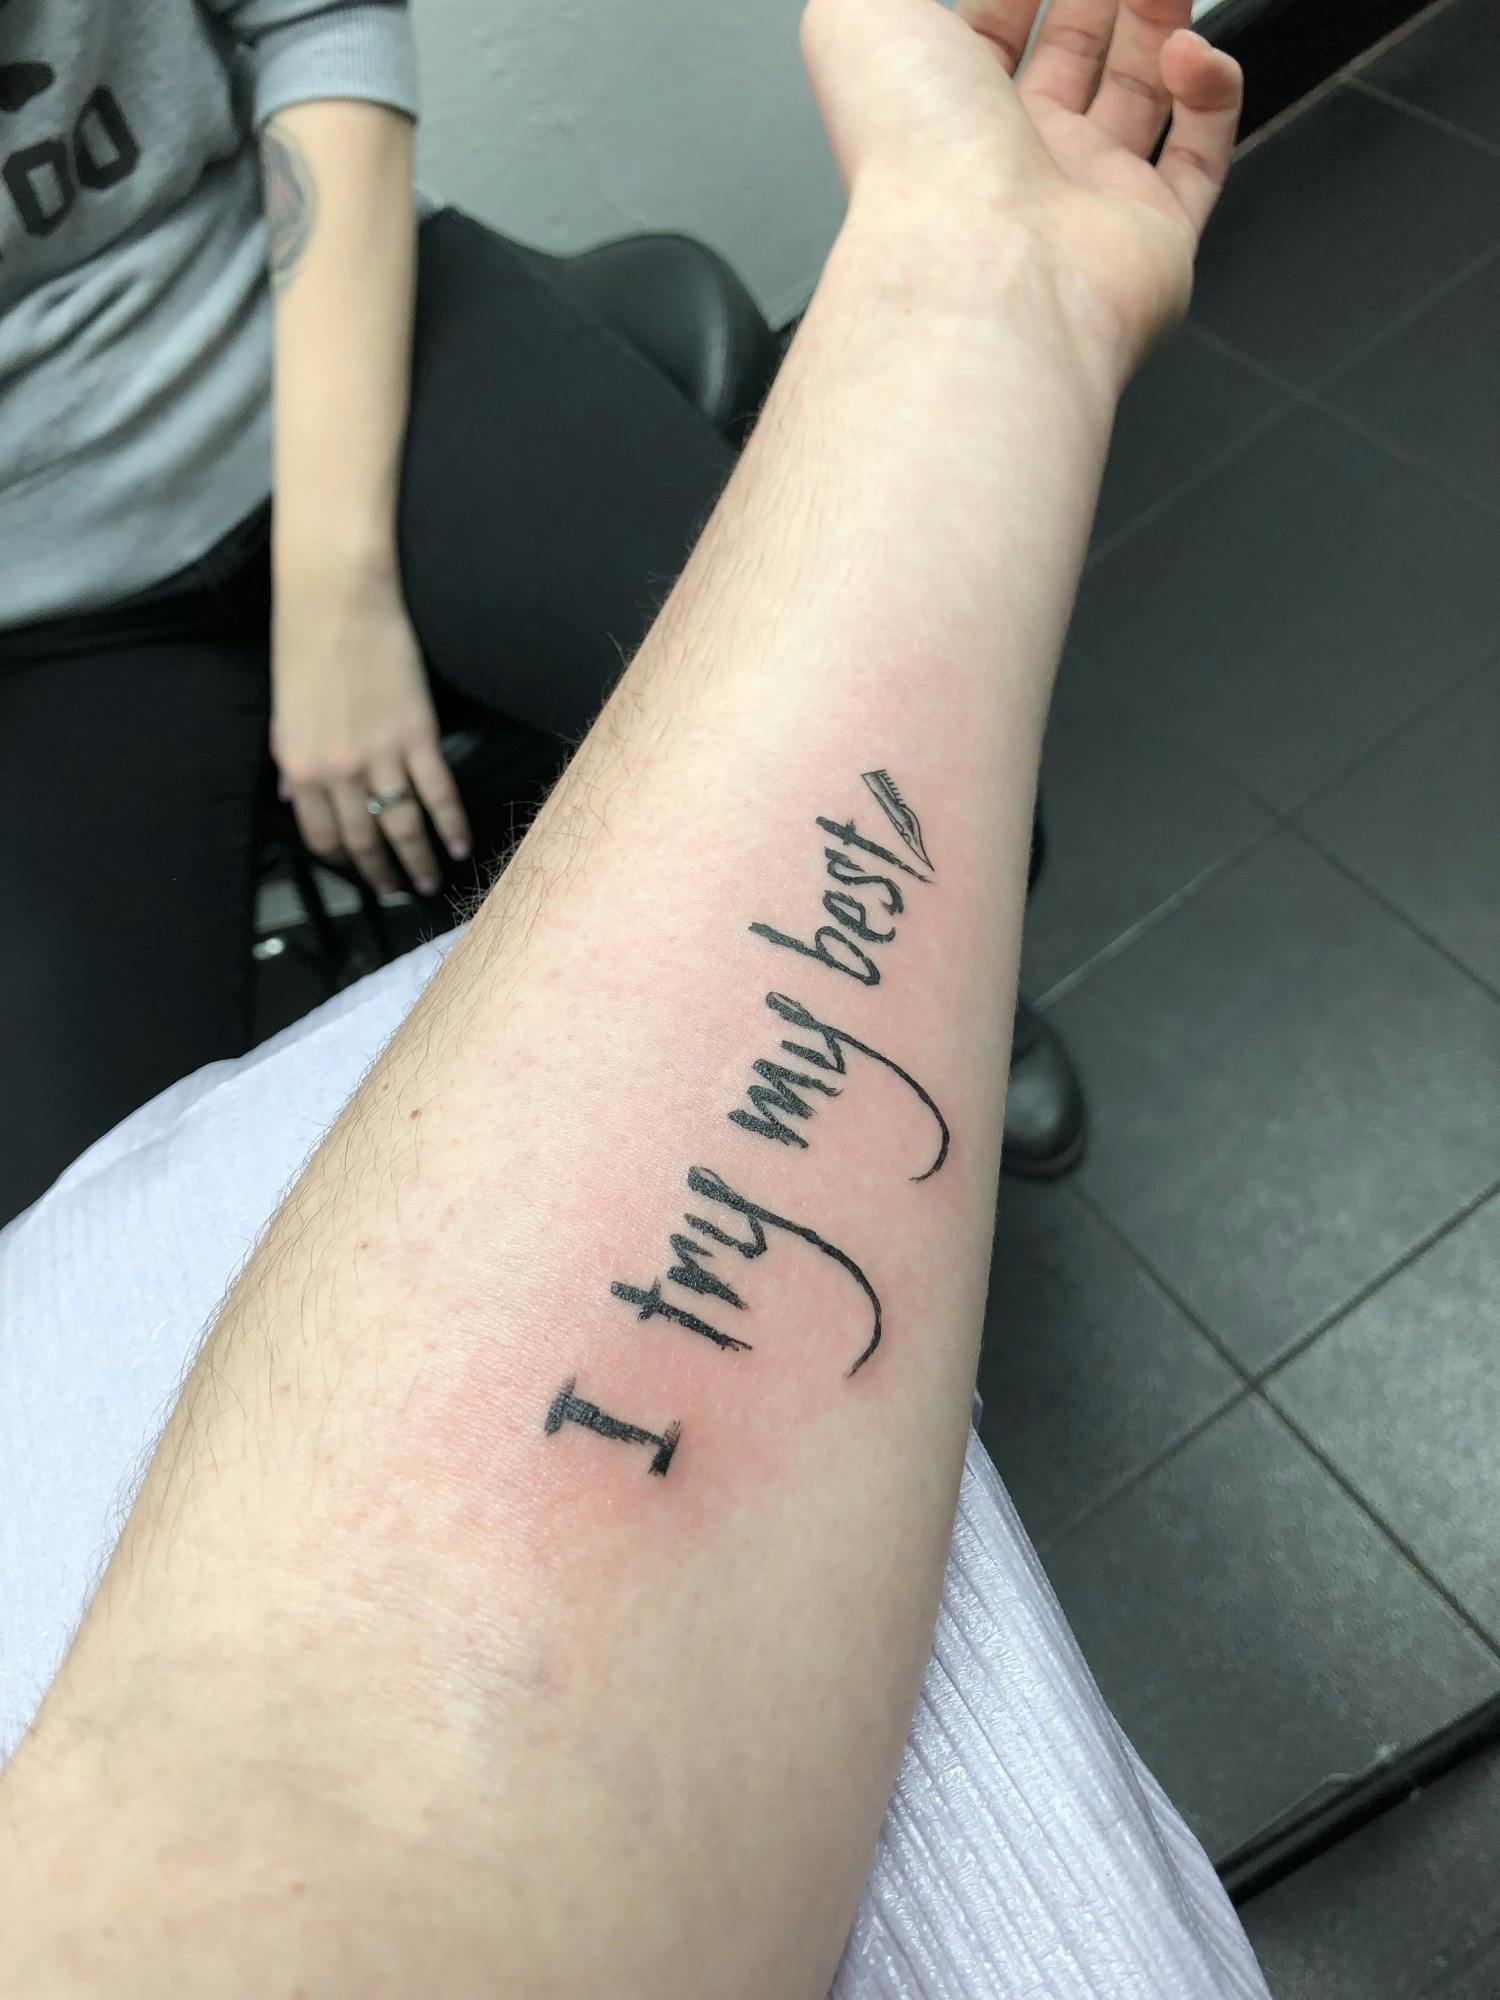 Rip speeds 2 hour stream for ben not to like hes new tattoo ishowsp   TikTok